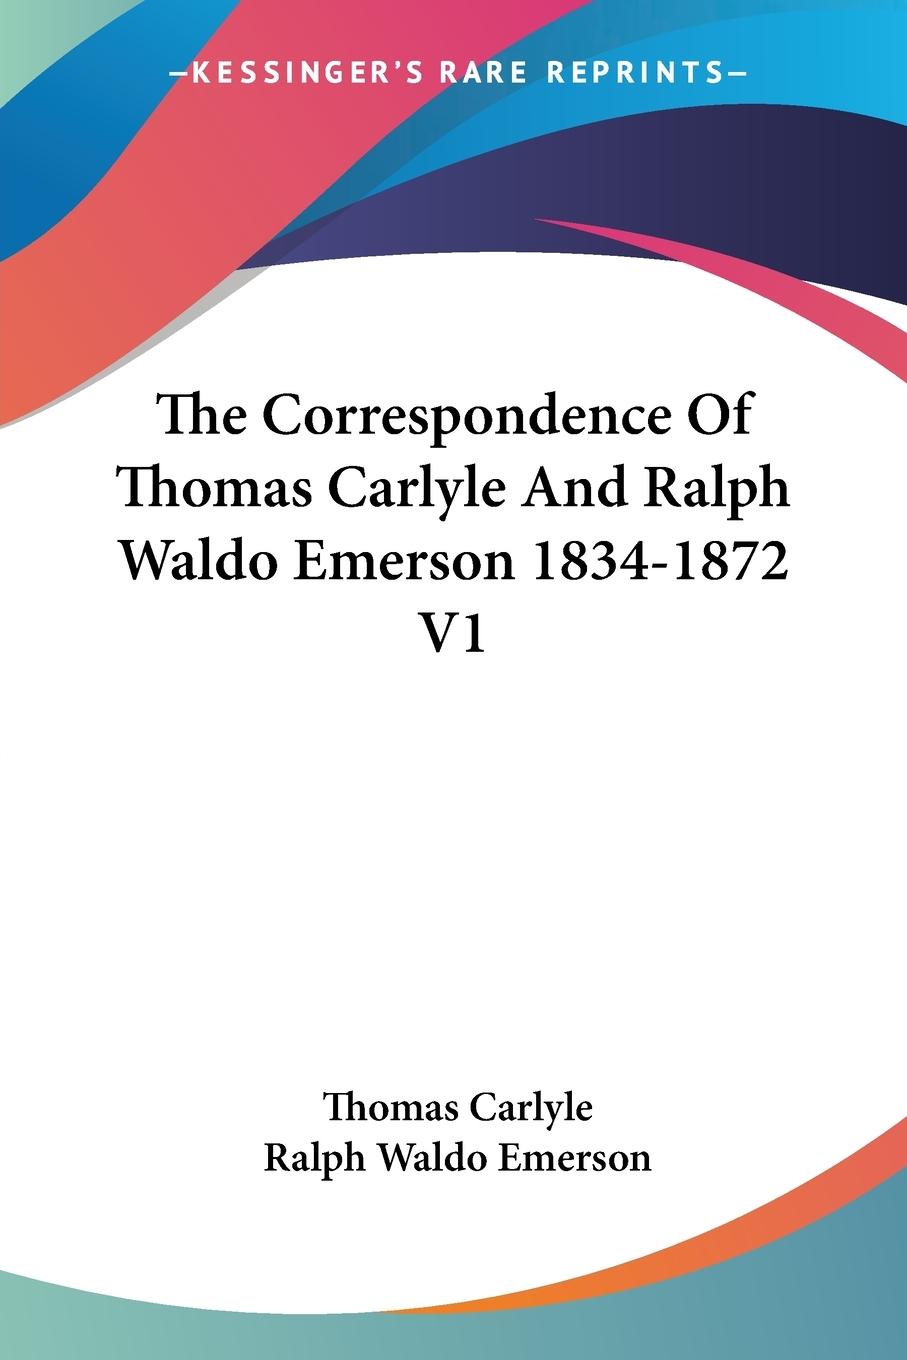 The Correspondence Of Thomas Carlyle And Ralph Waldo Emerson 1834-1872 V1 - Carlyle, Thomas Emerson, Ralph Waldo